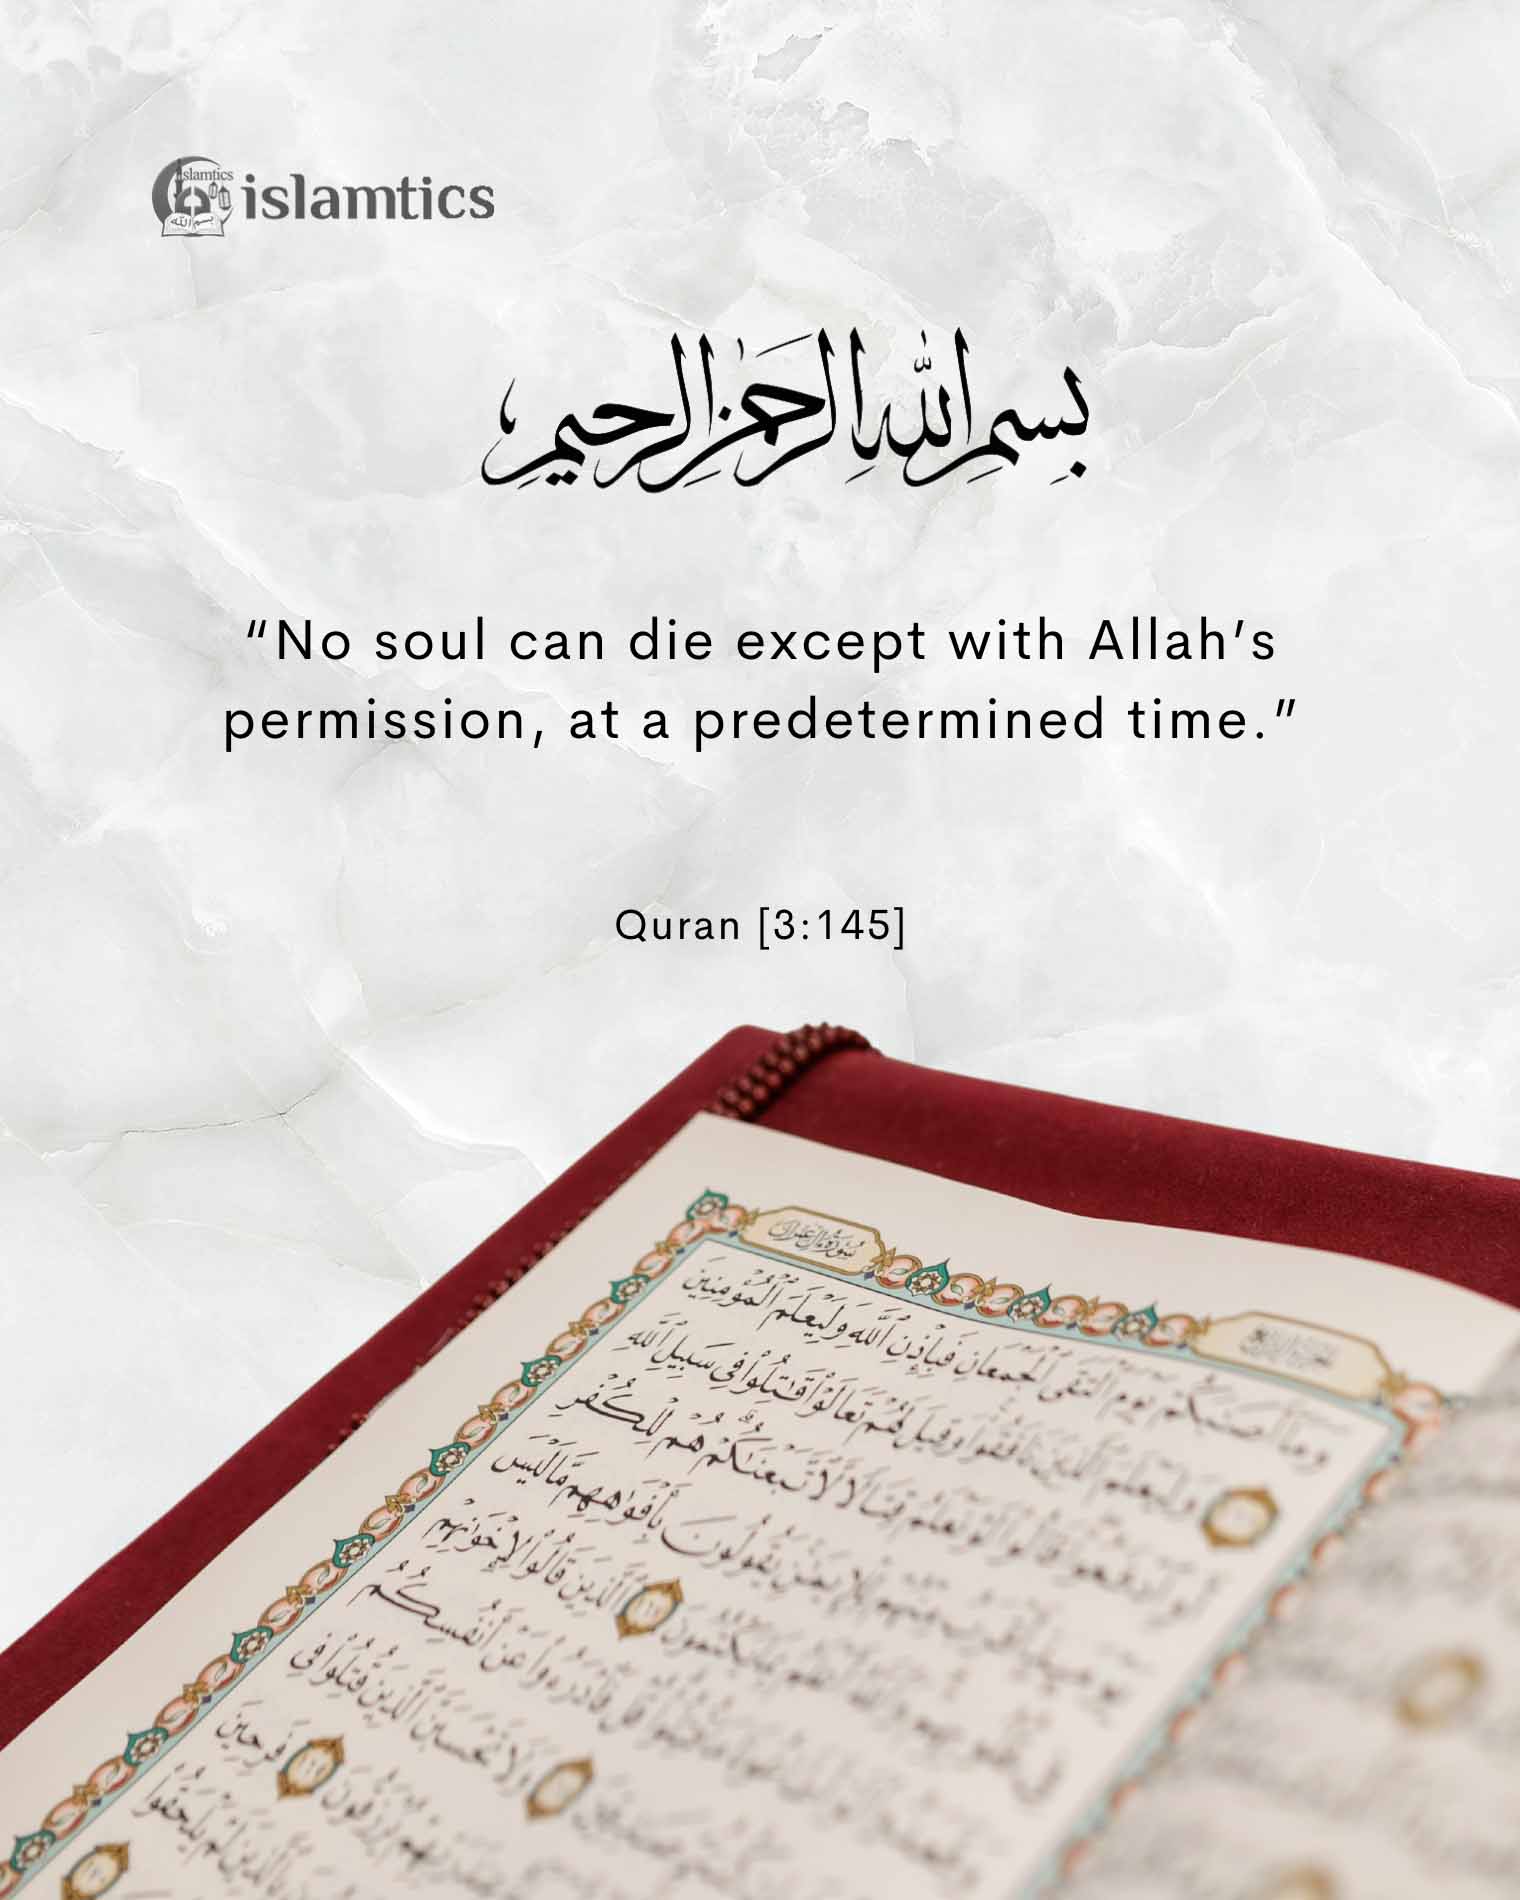  “No soul can die except with Allah’s permission, at a predetermined time.”